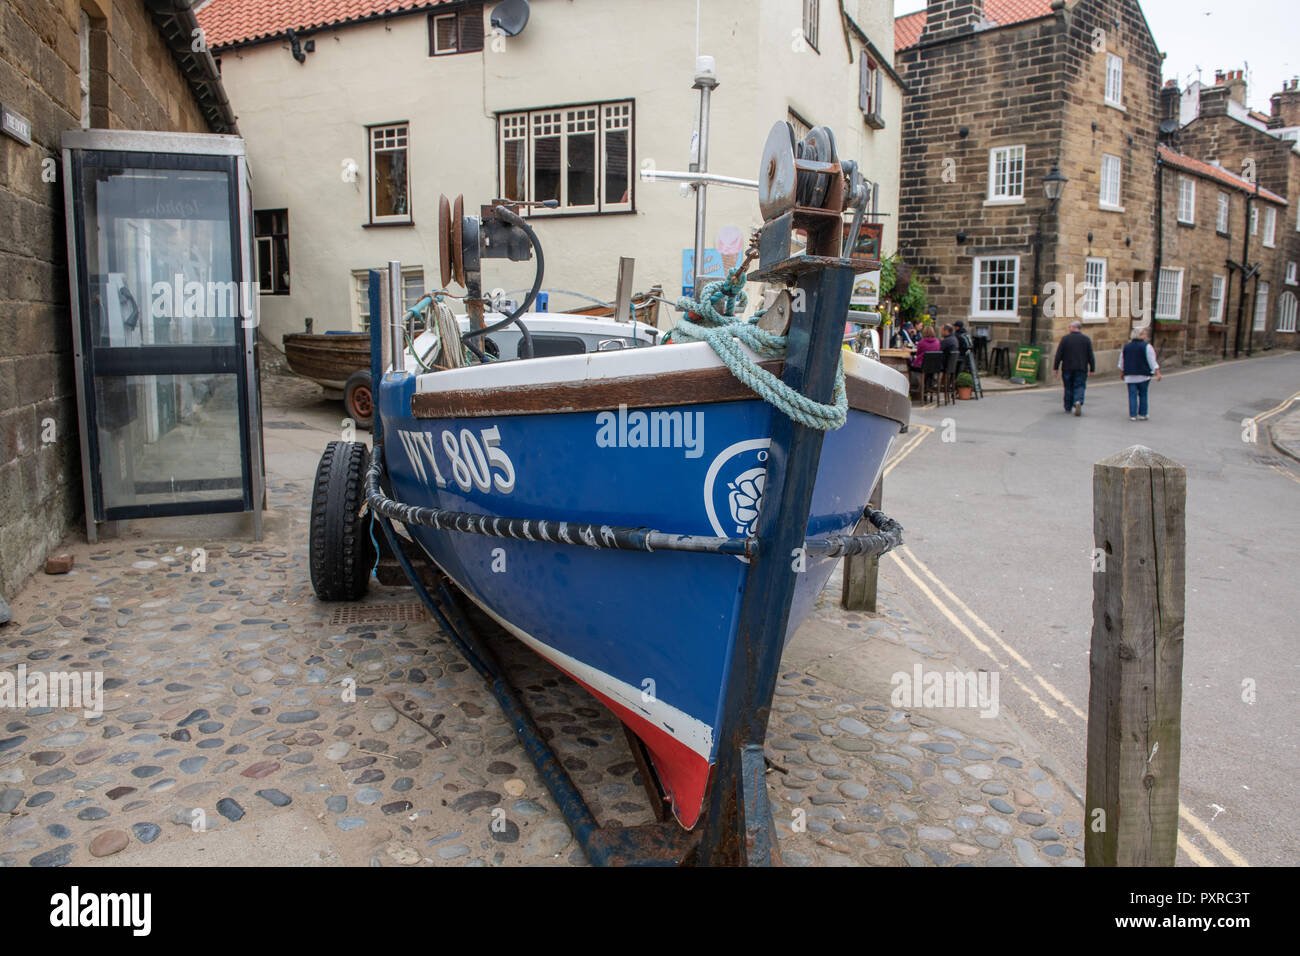 Tied down to a metal trailer, a small blue boat small rests on shore in Robin Hood's Bay, Yorkshire, UK Stock Photo